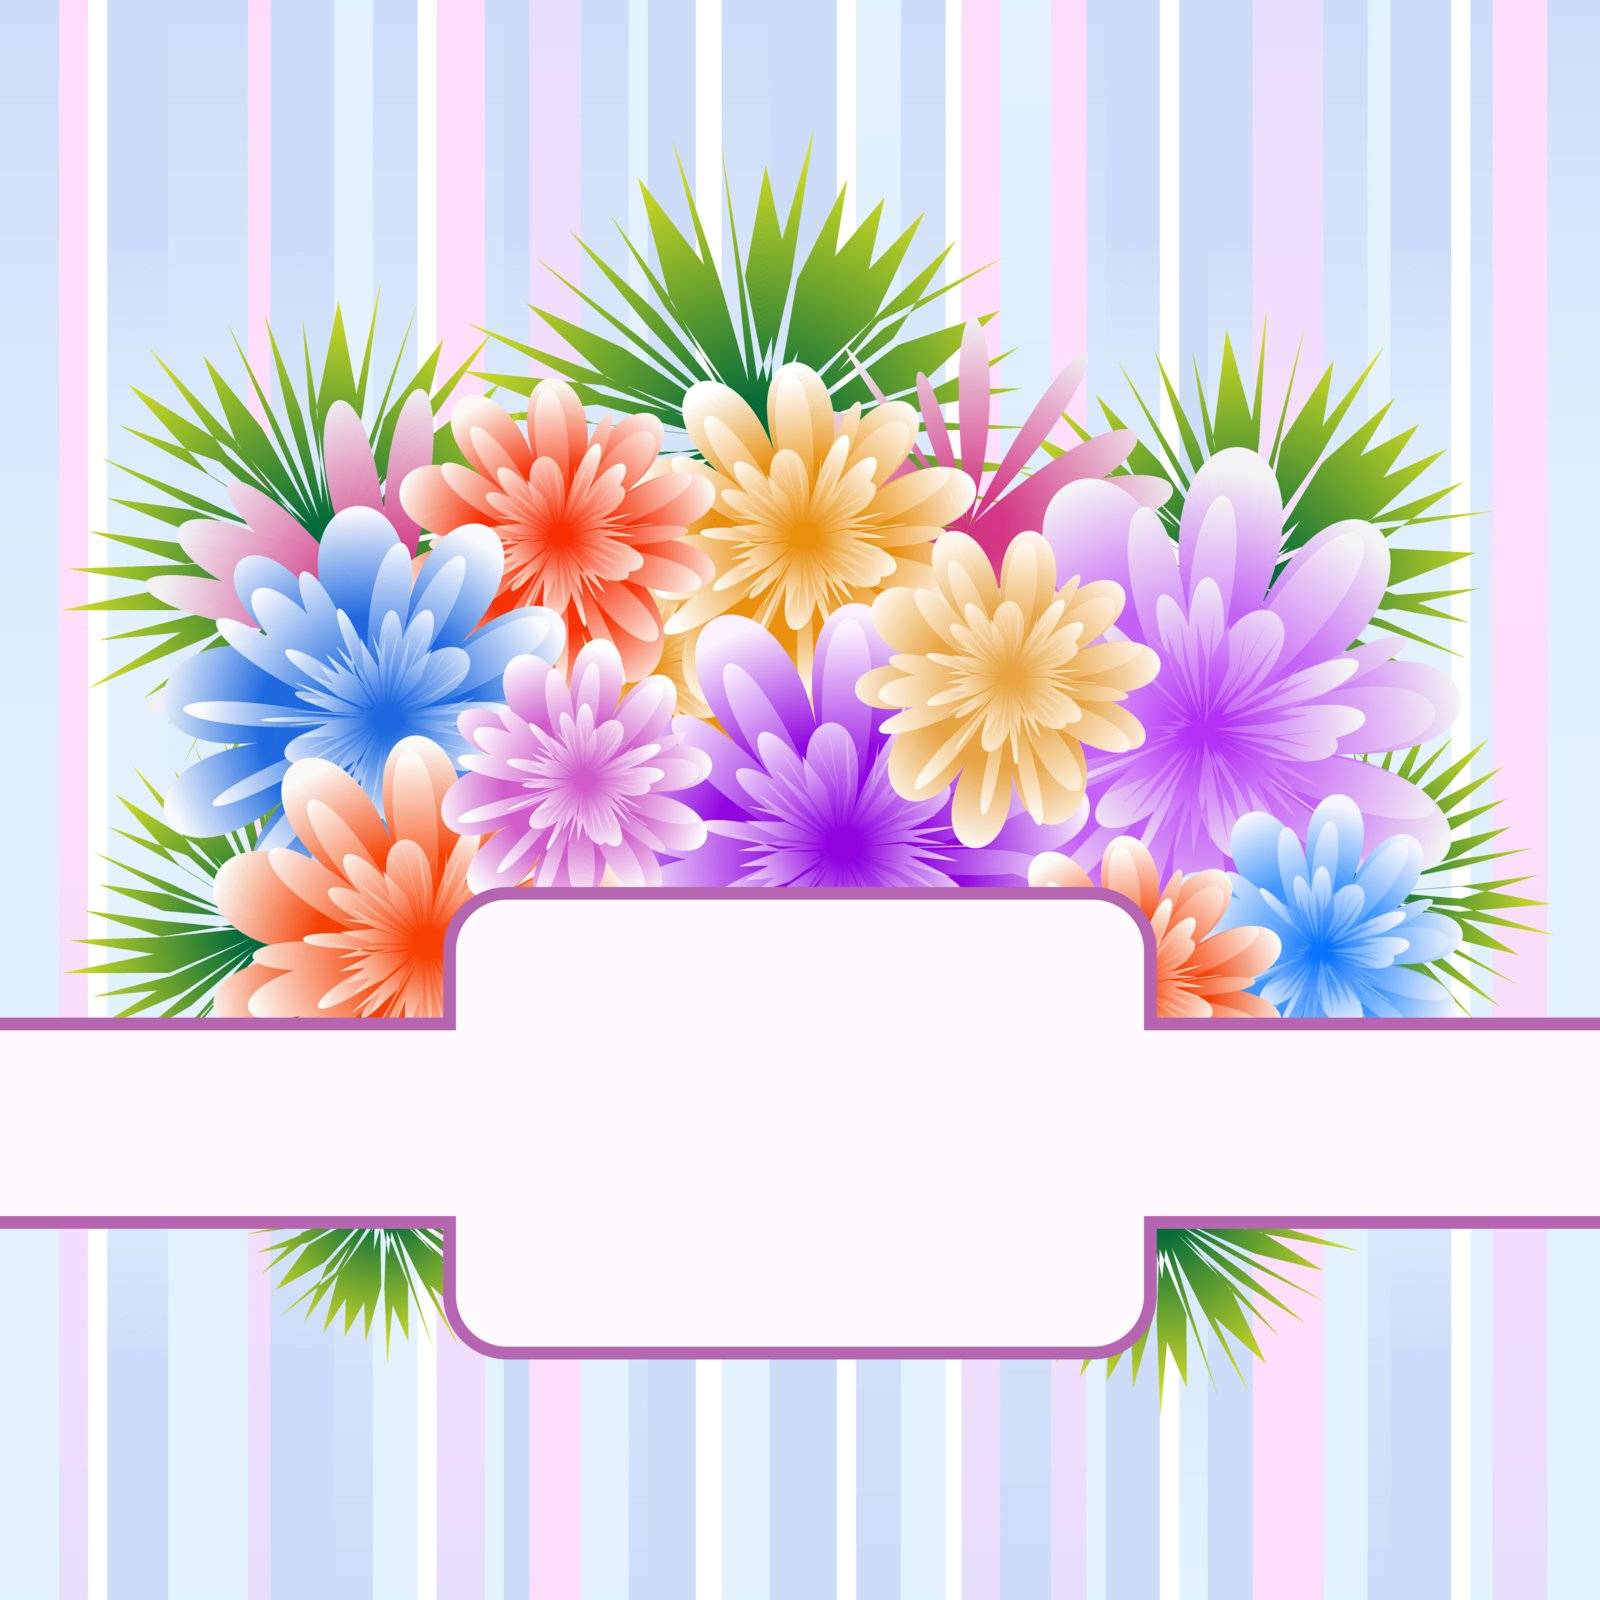 Flowers for mothers day, anniversary or birthday celebration set on a striped background. Copy space for text.